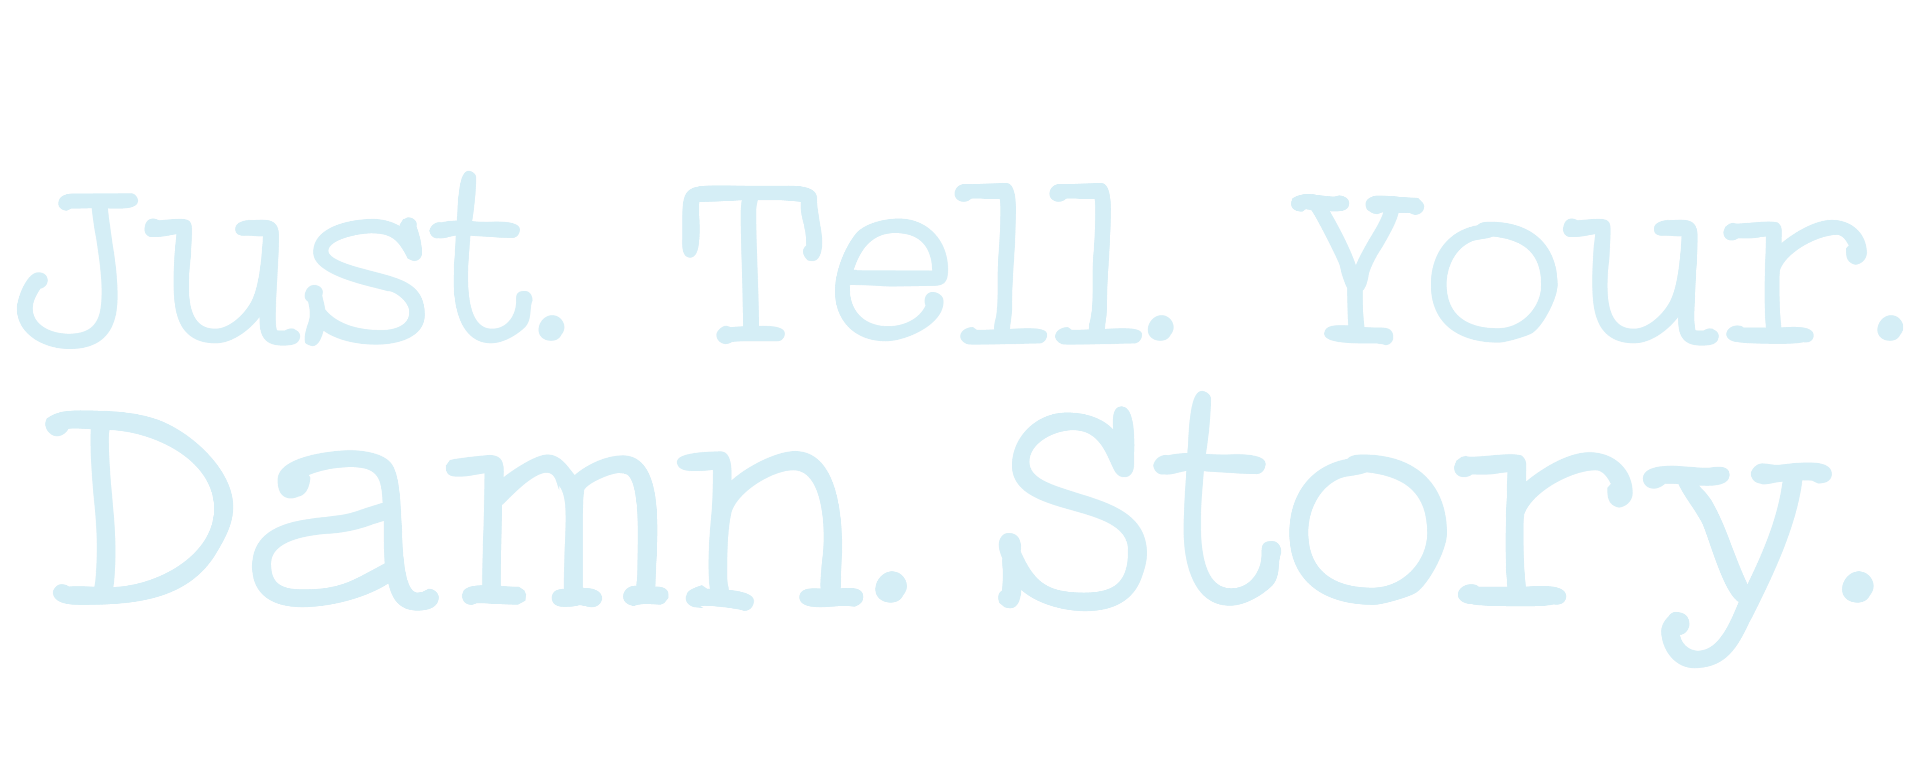 Just tell your damn story